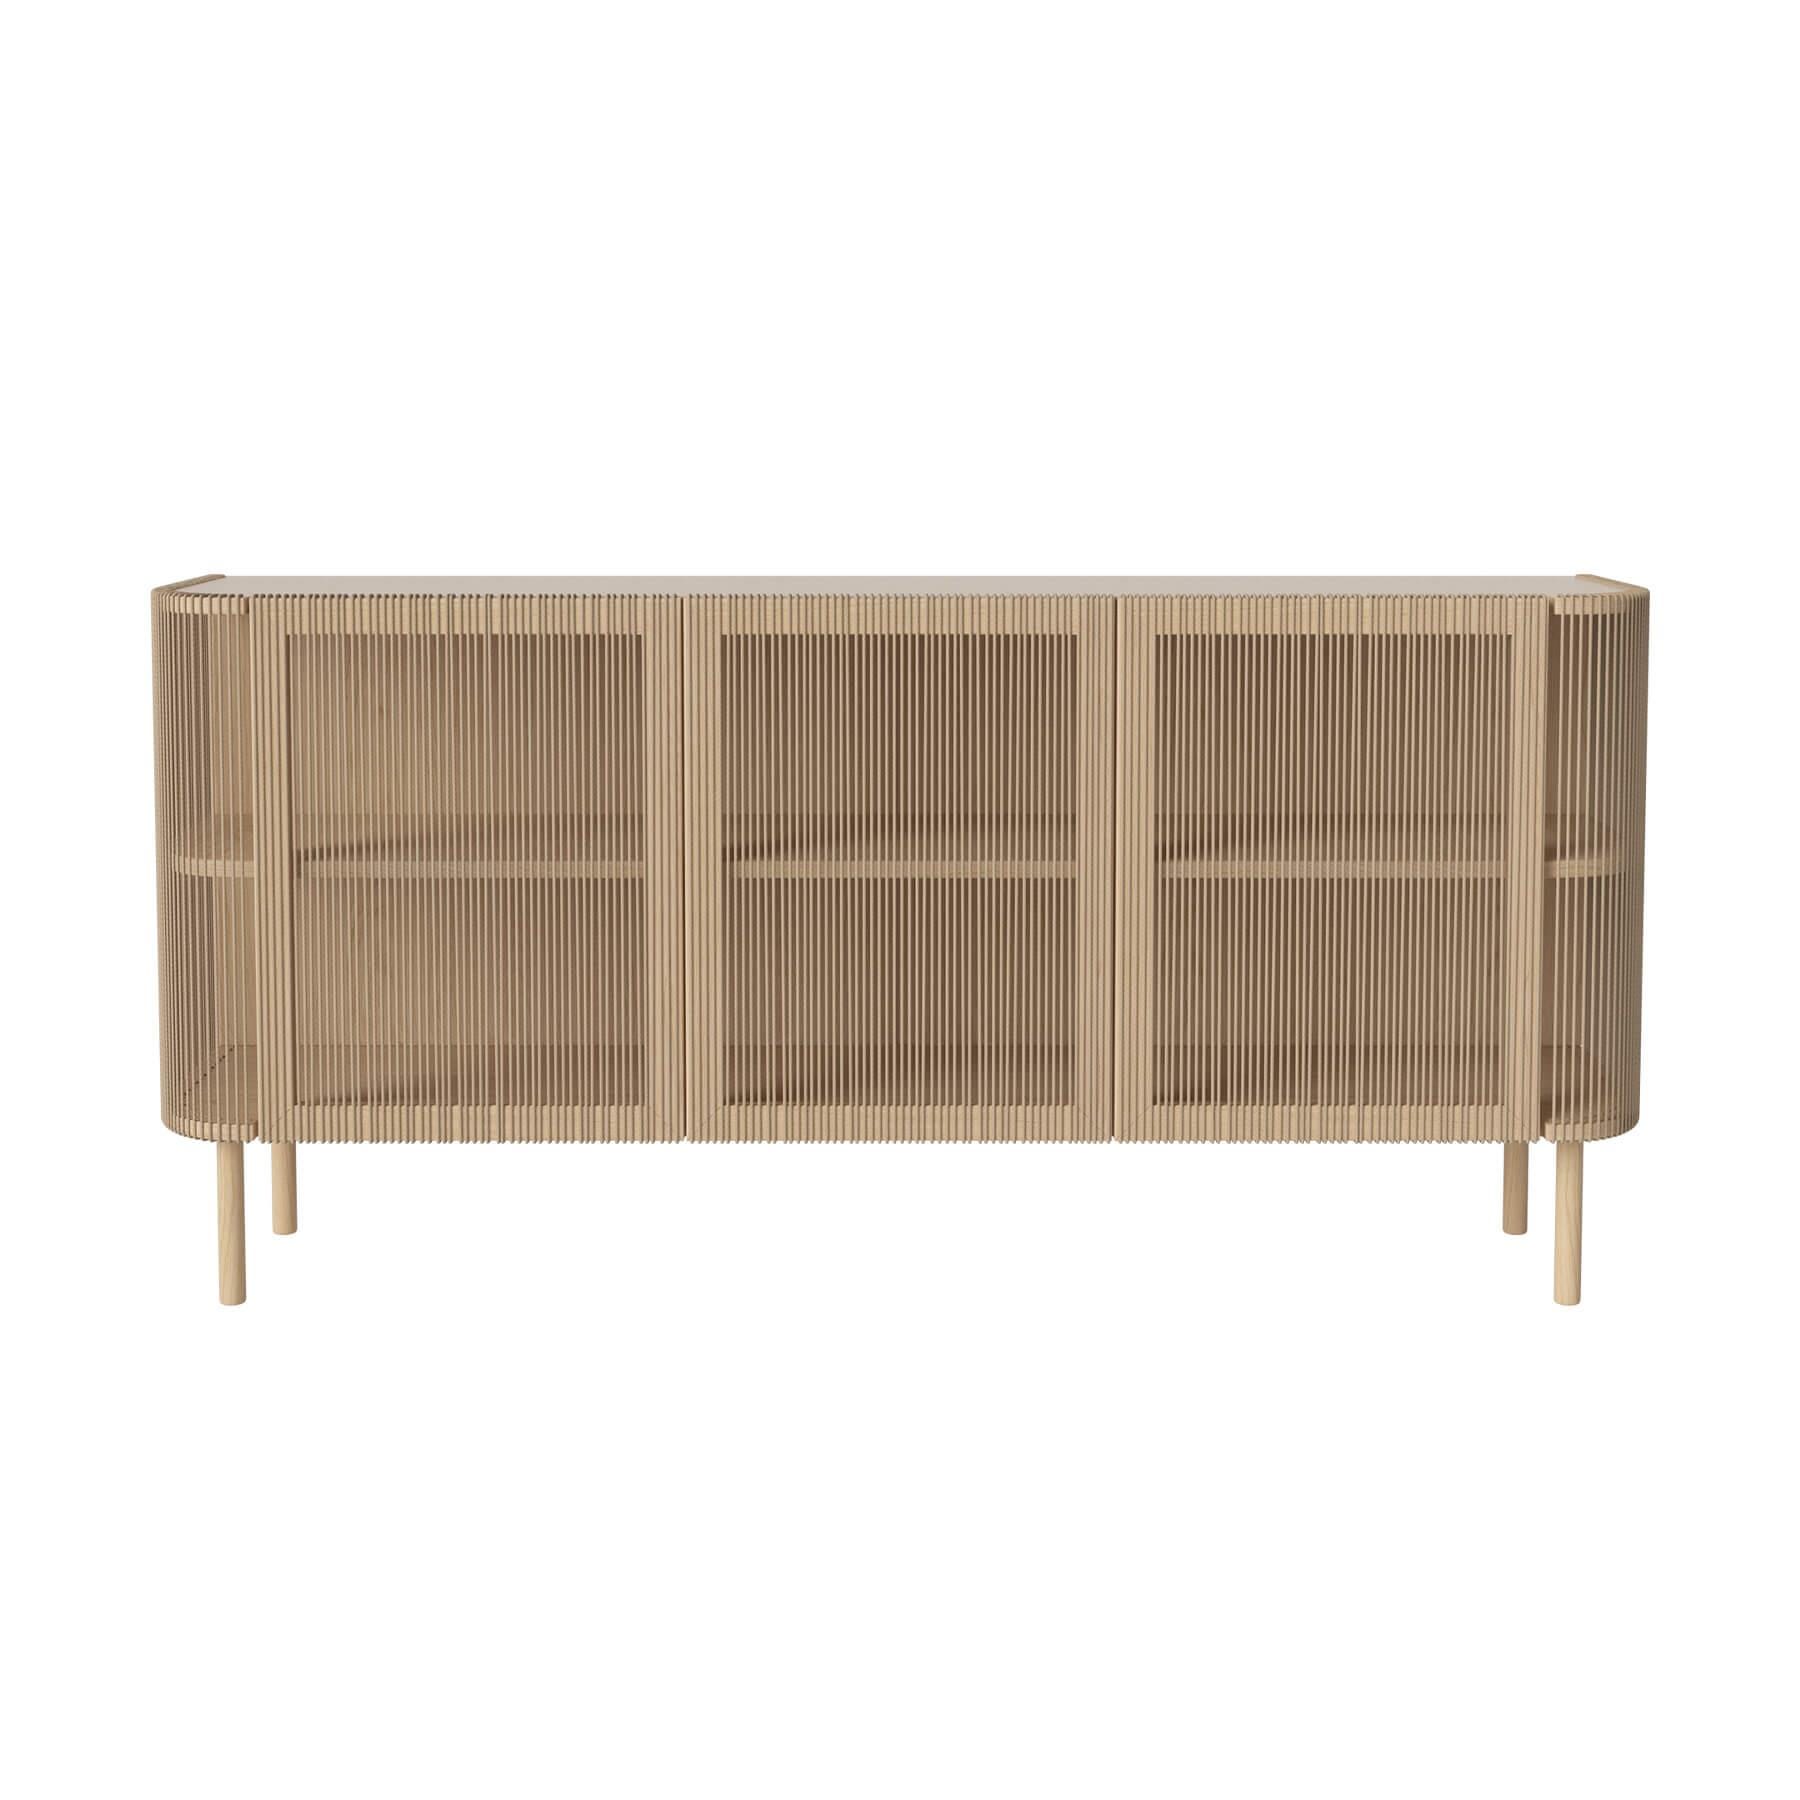 Bolia Cord Sideboard Natural Bolia Cord Large Light Wood Designer Furniture From Holloways Of Ludlow